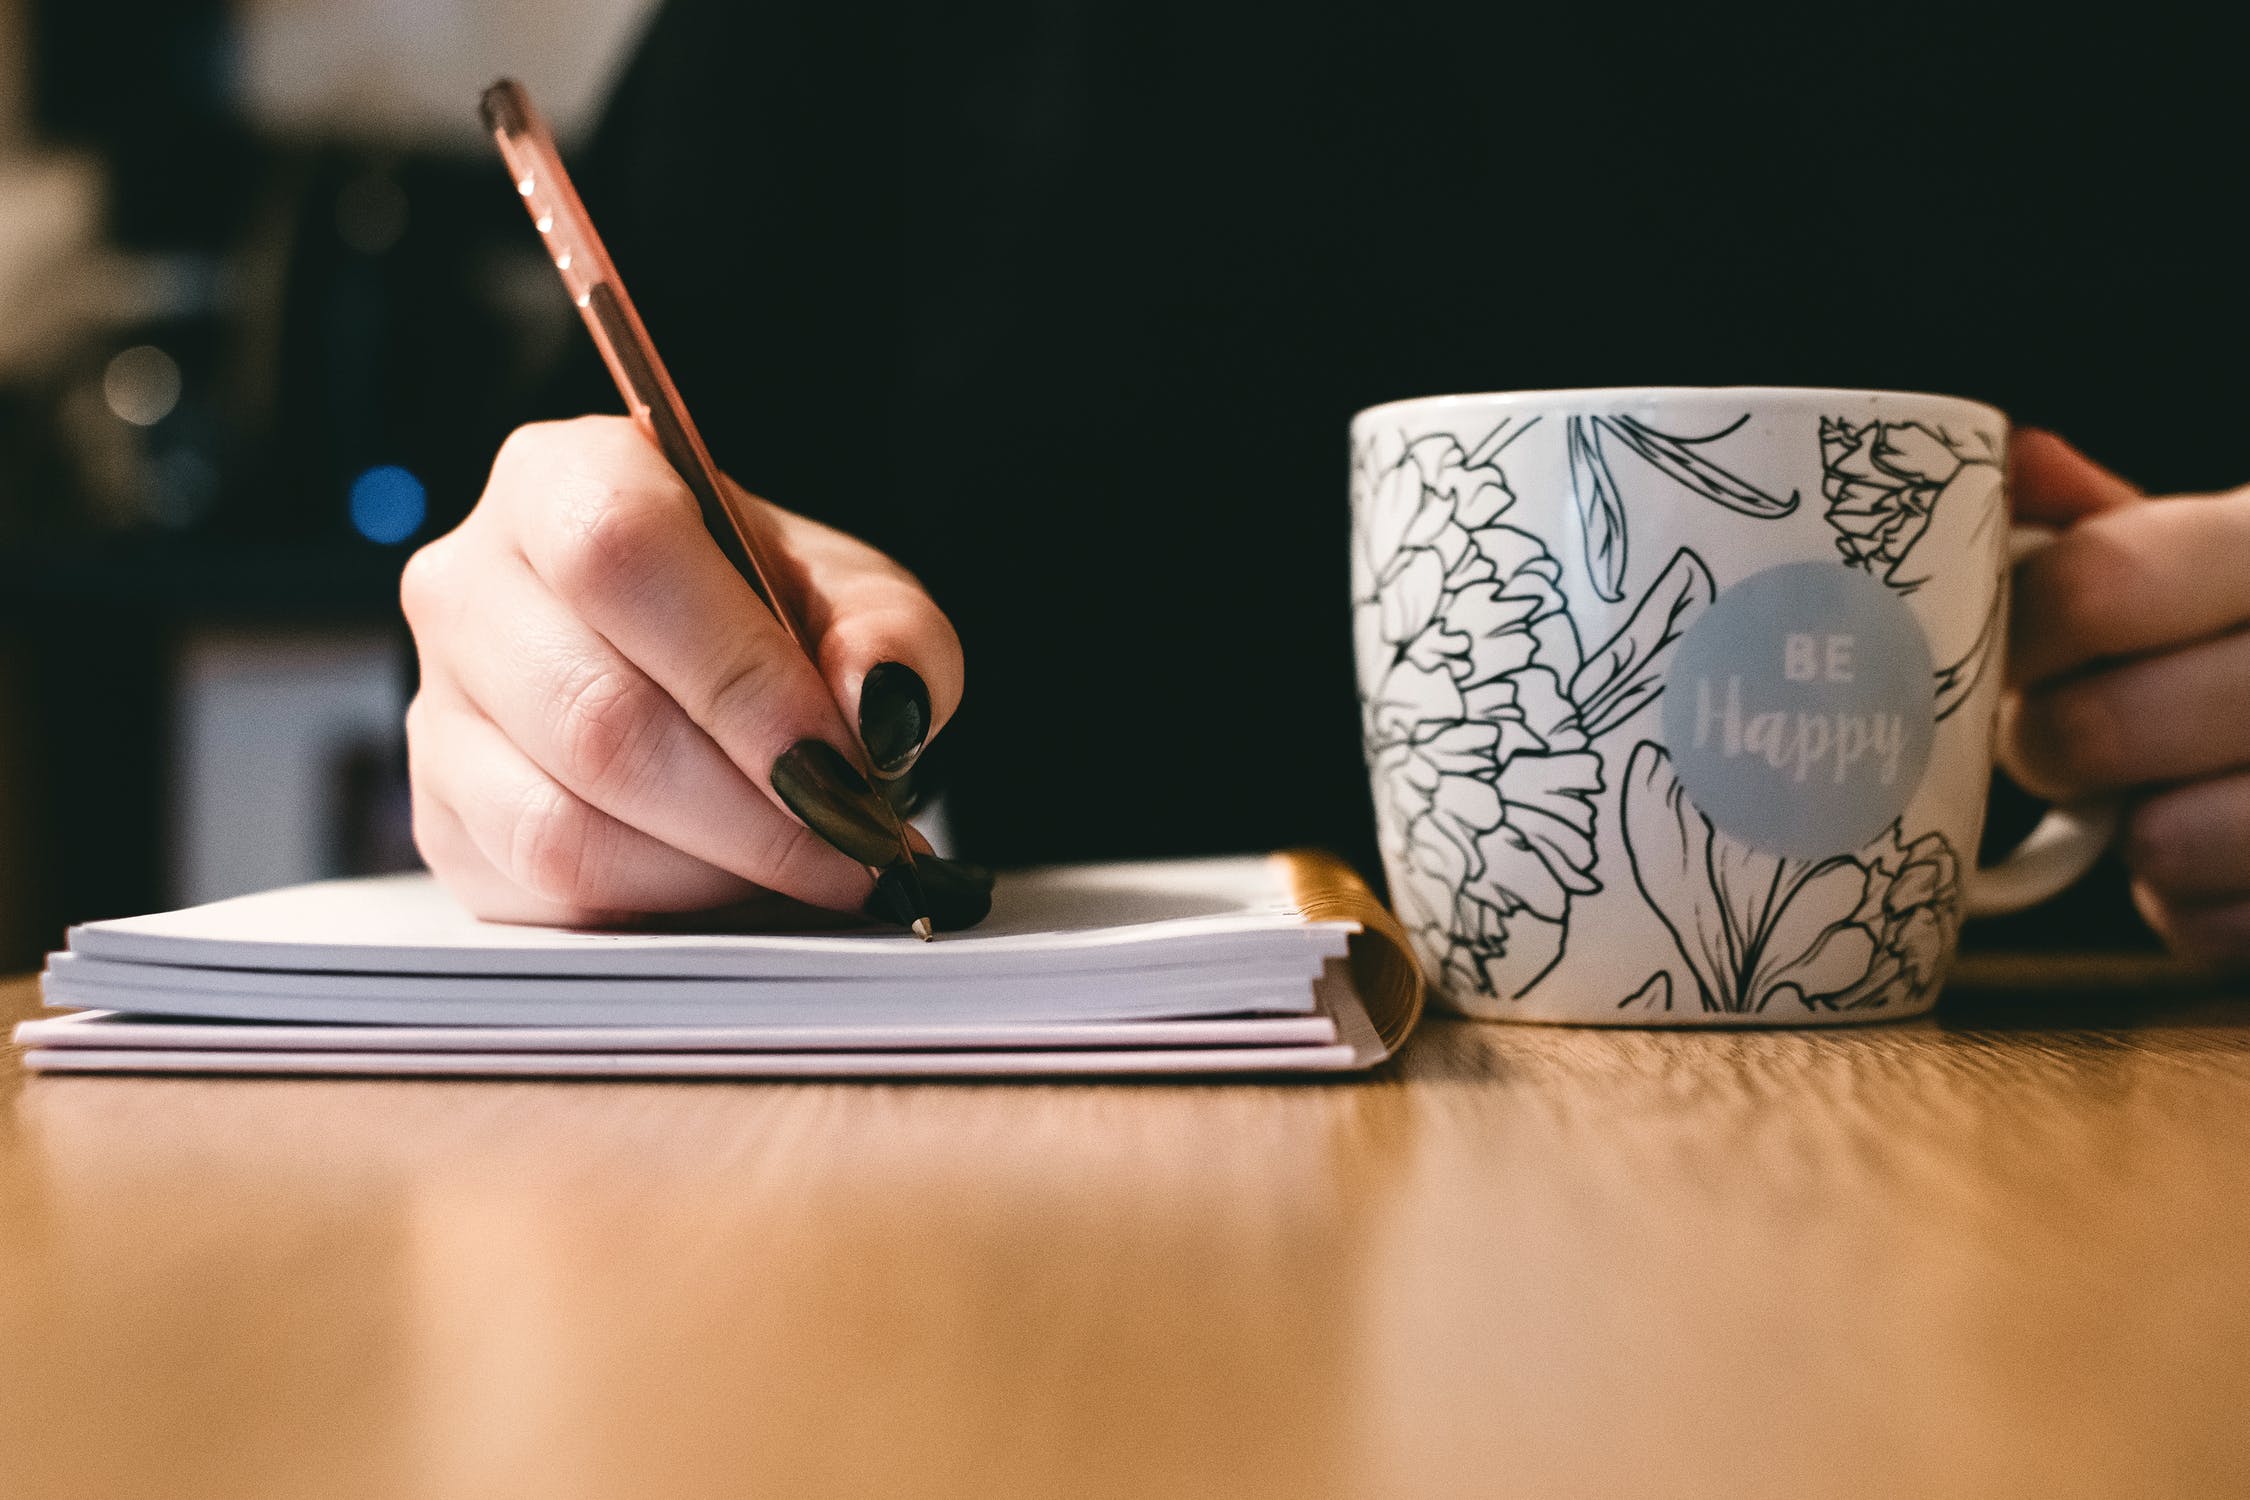 A woman writes on her notepad while holding a mug.